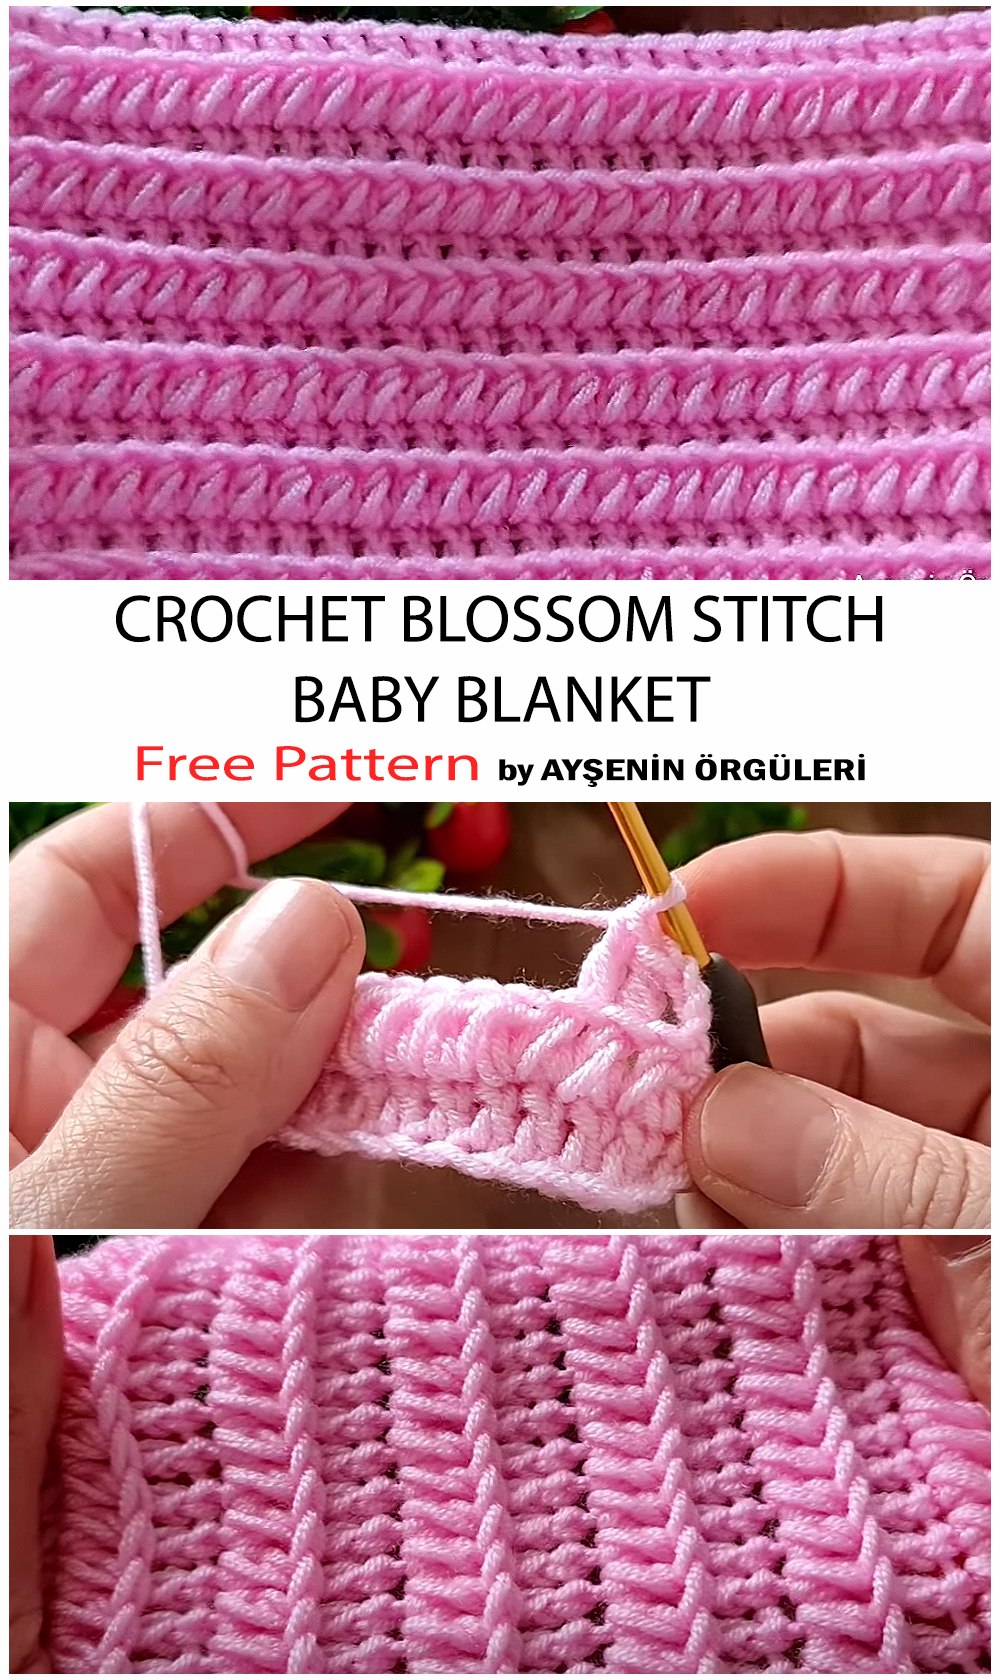 How To Crochet Blossom Stitch Baby Blanket - Free Pattern For Beginners